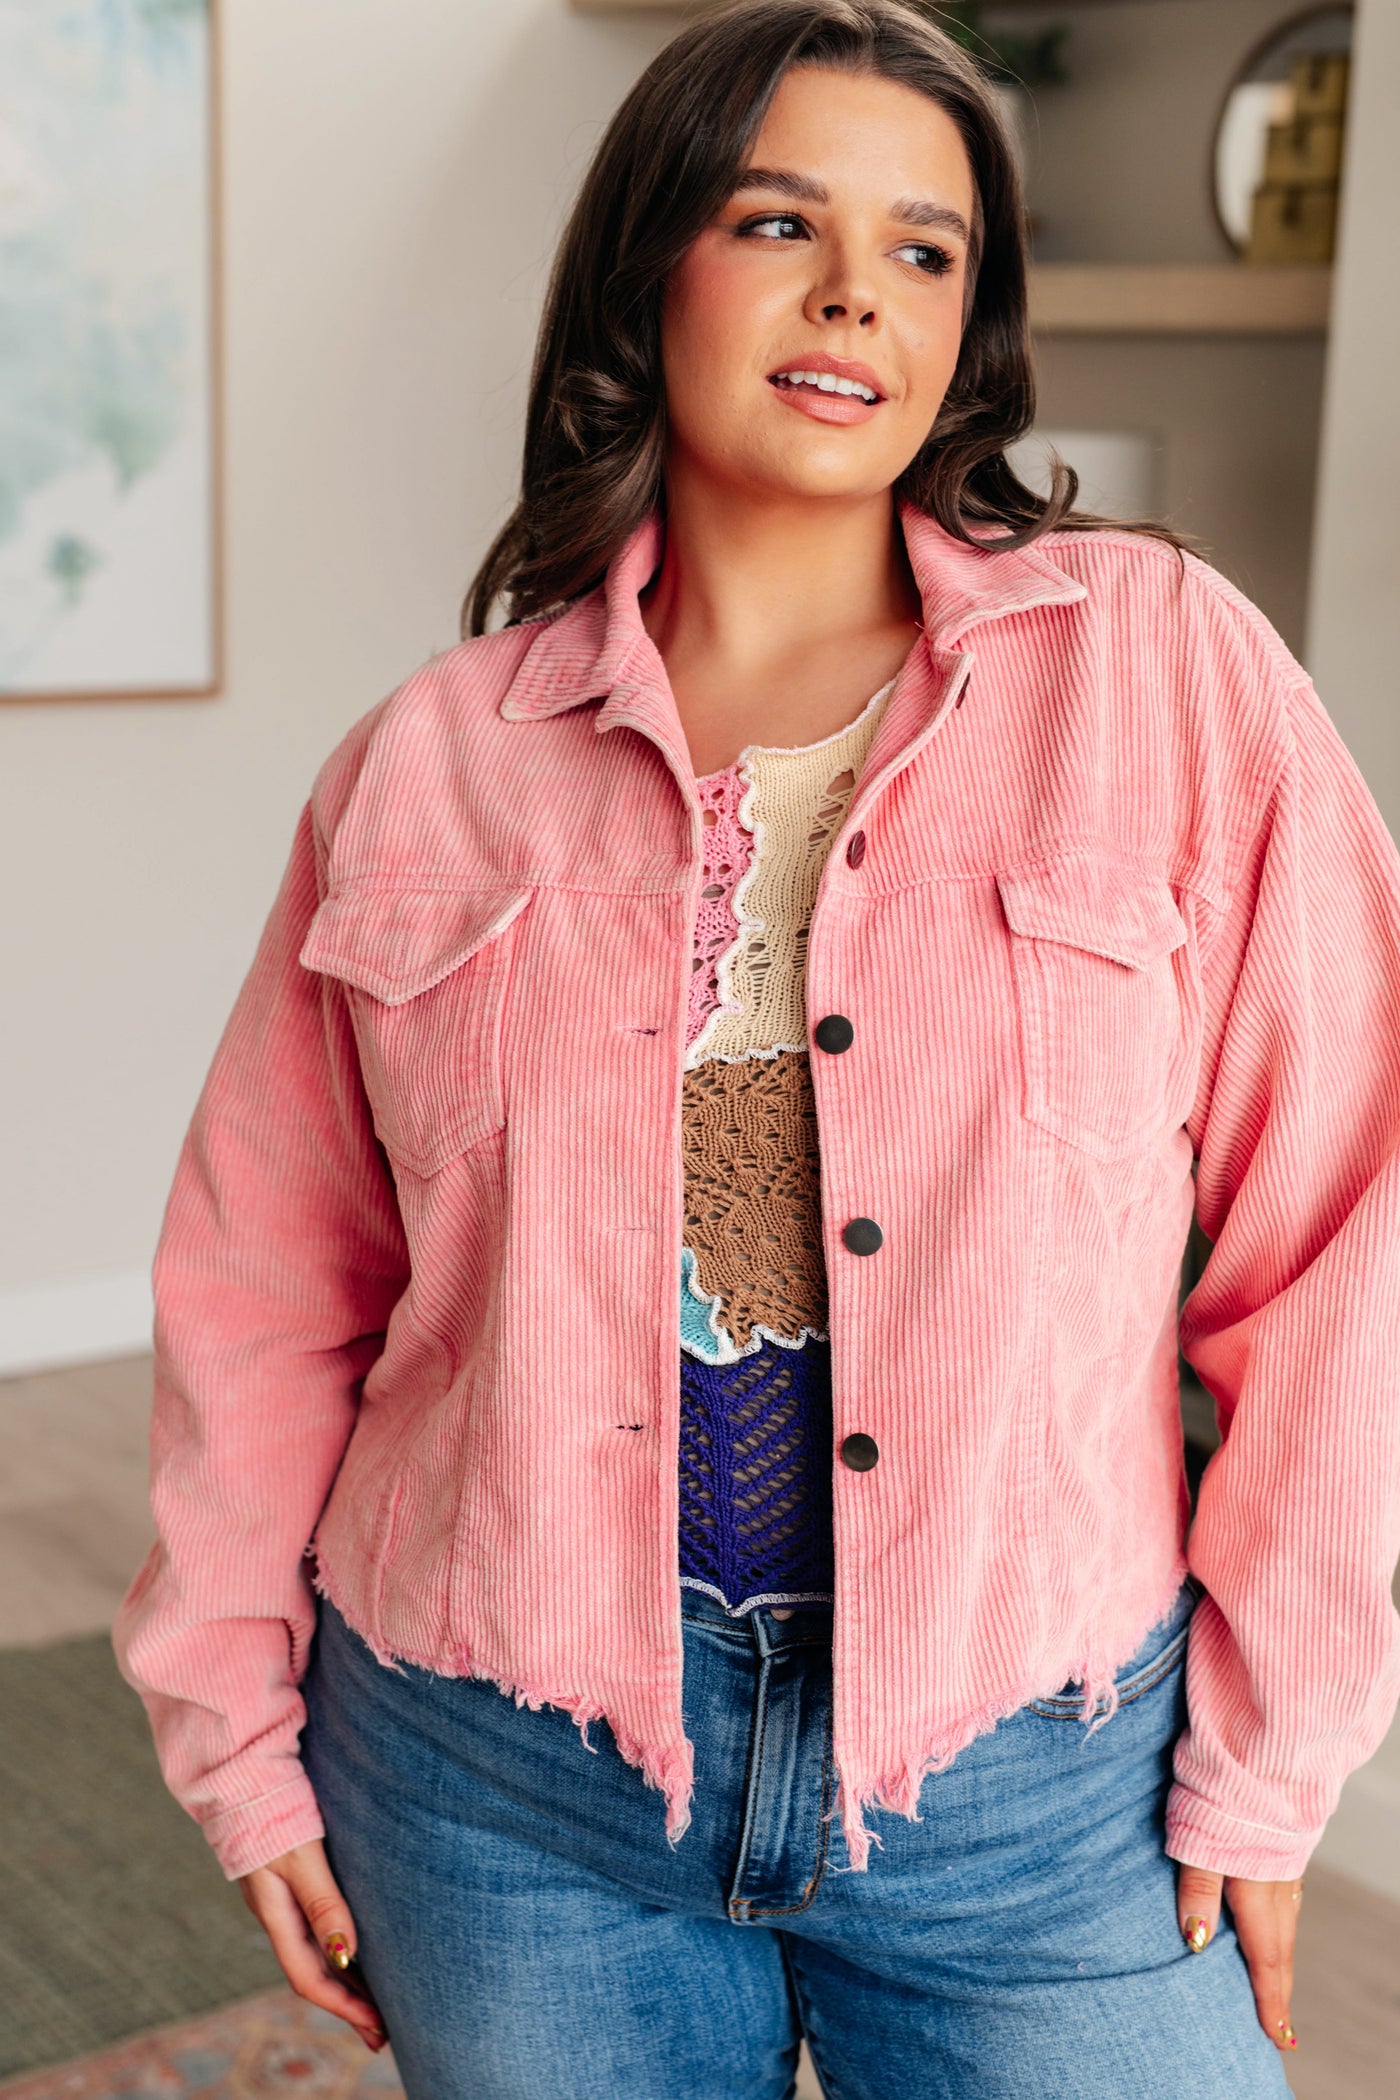 Main Stage Corduroy Jacket in Neon Pink-Layers-Ave Shops-Market Street Nest, Fashionable Clothing, Shoes and Home Décor Located in Mabank, TX